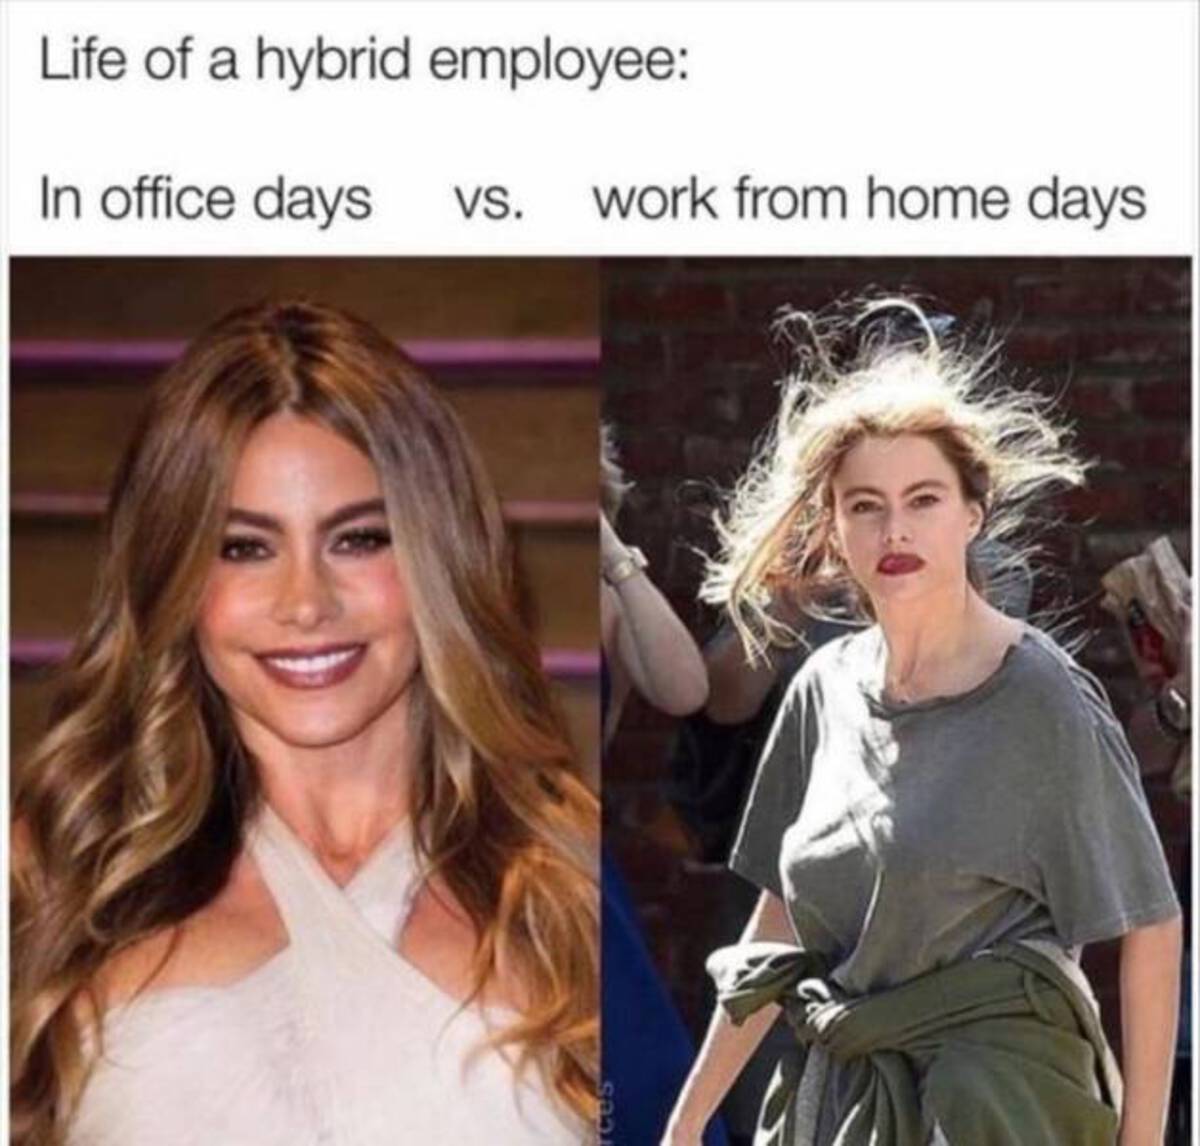 dr justin saliman sofia vergara - Life of a hybrid employee In office days Vs. work from home days